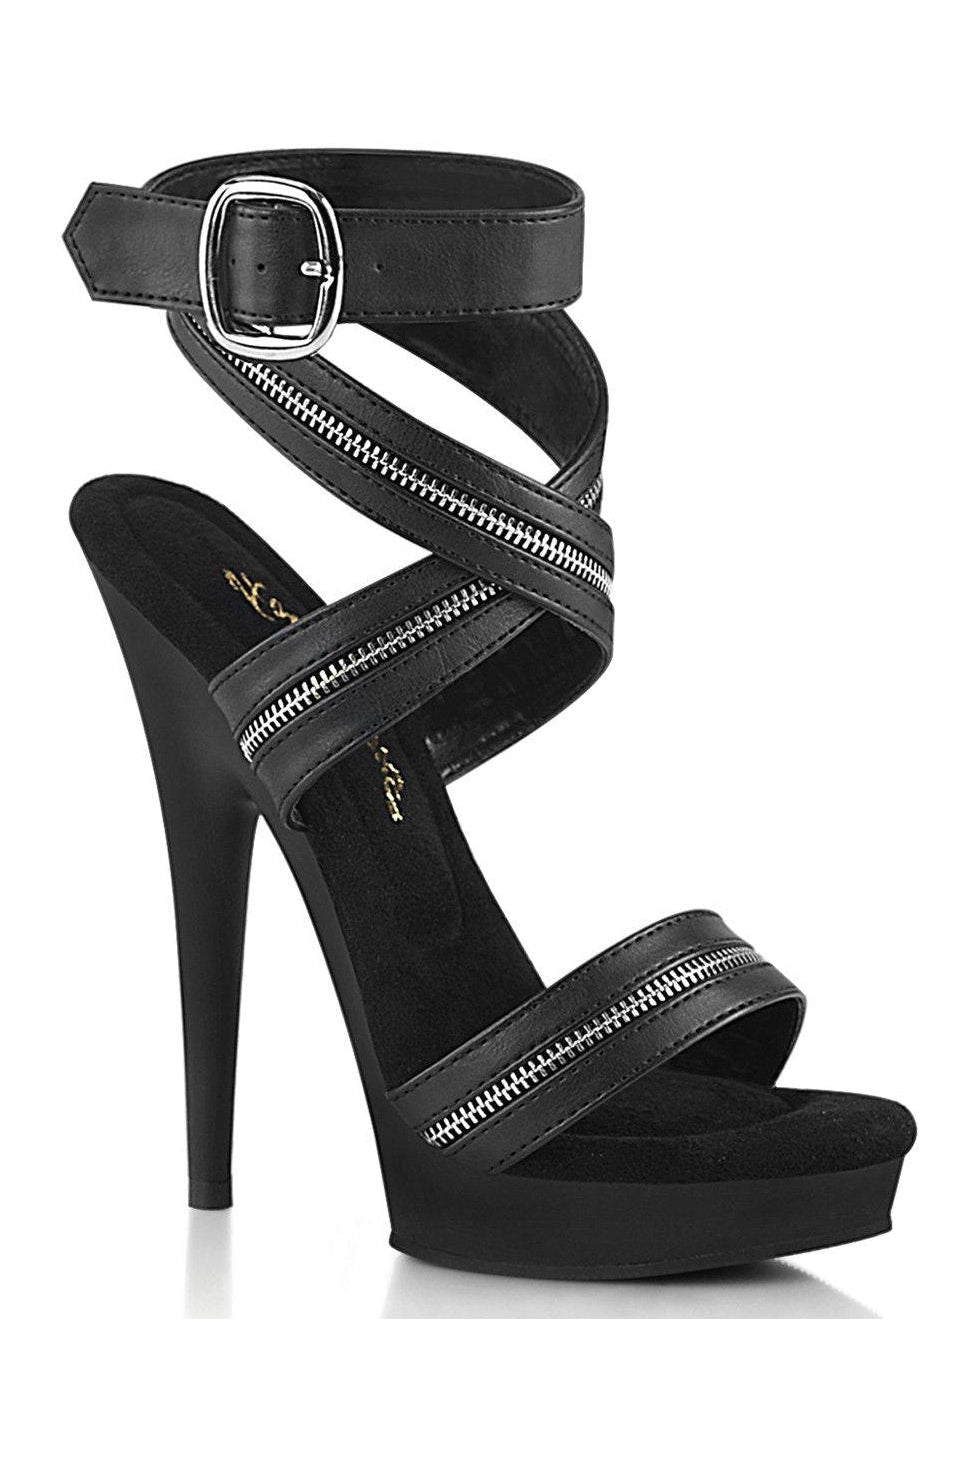 SULTRY-619 Sandal | Black Faux Leather-Sandals-Fabulicious-Black-6-Faux Leather-SEXYSHOES.COM